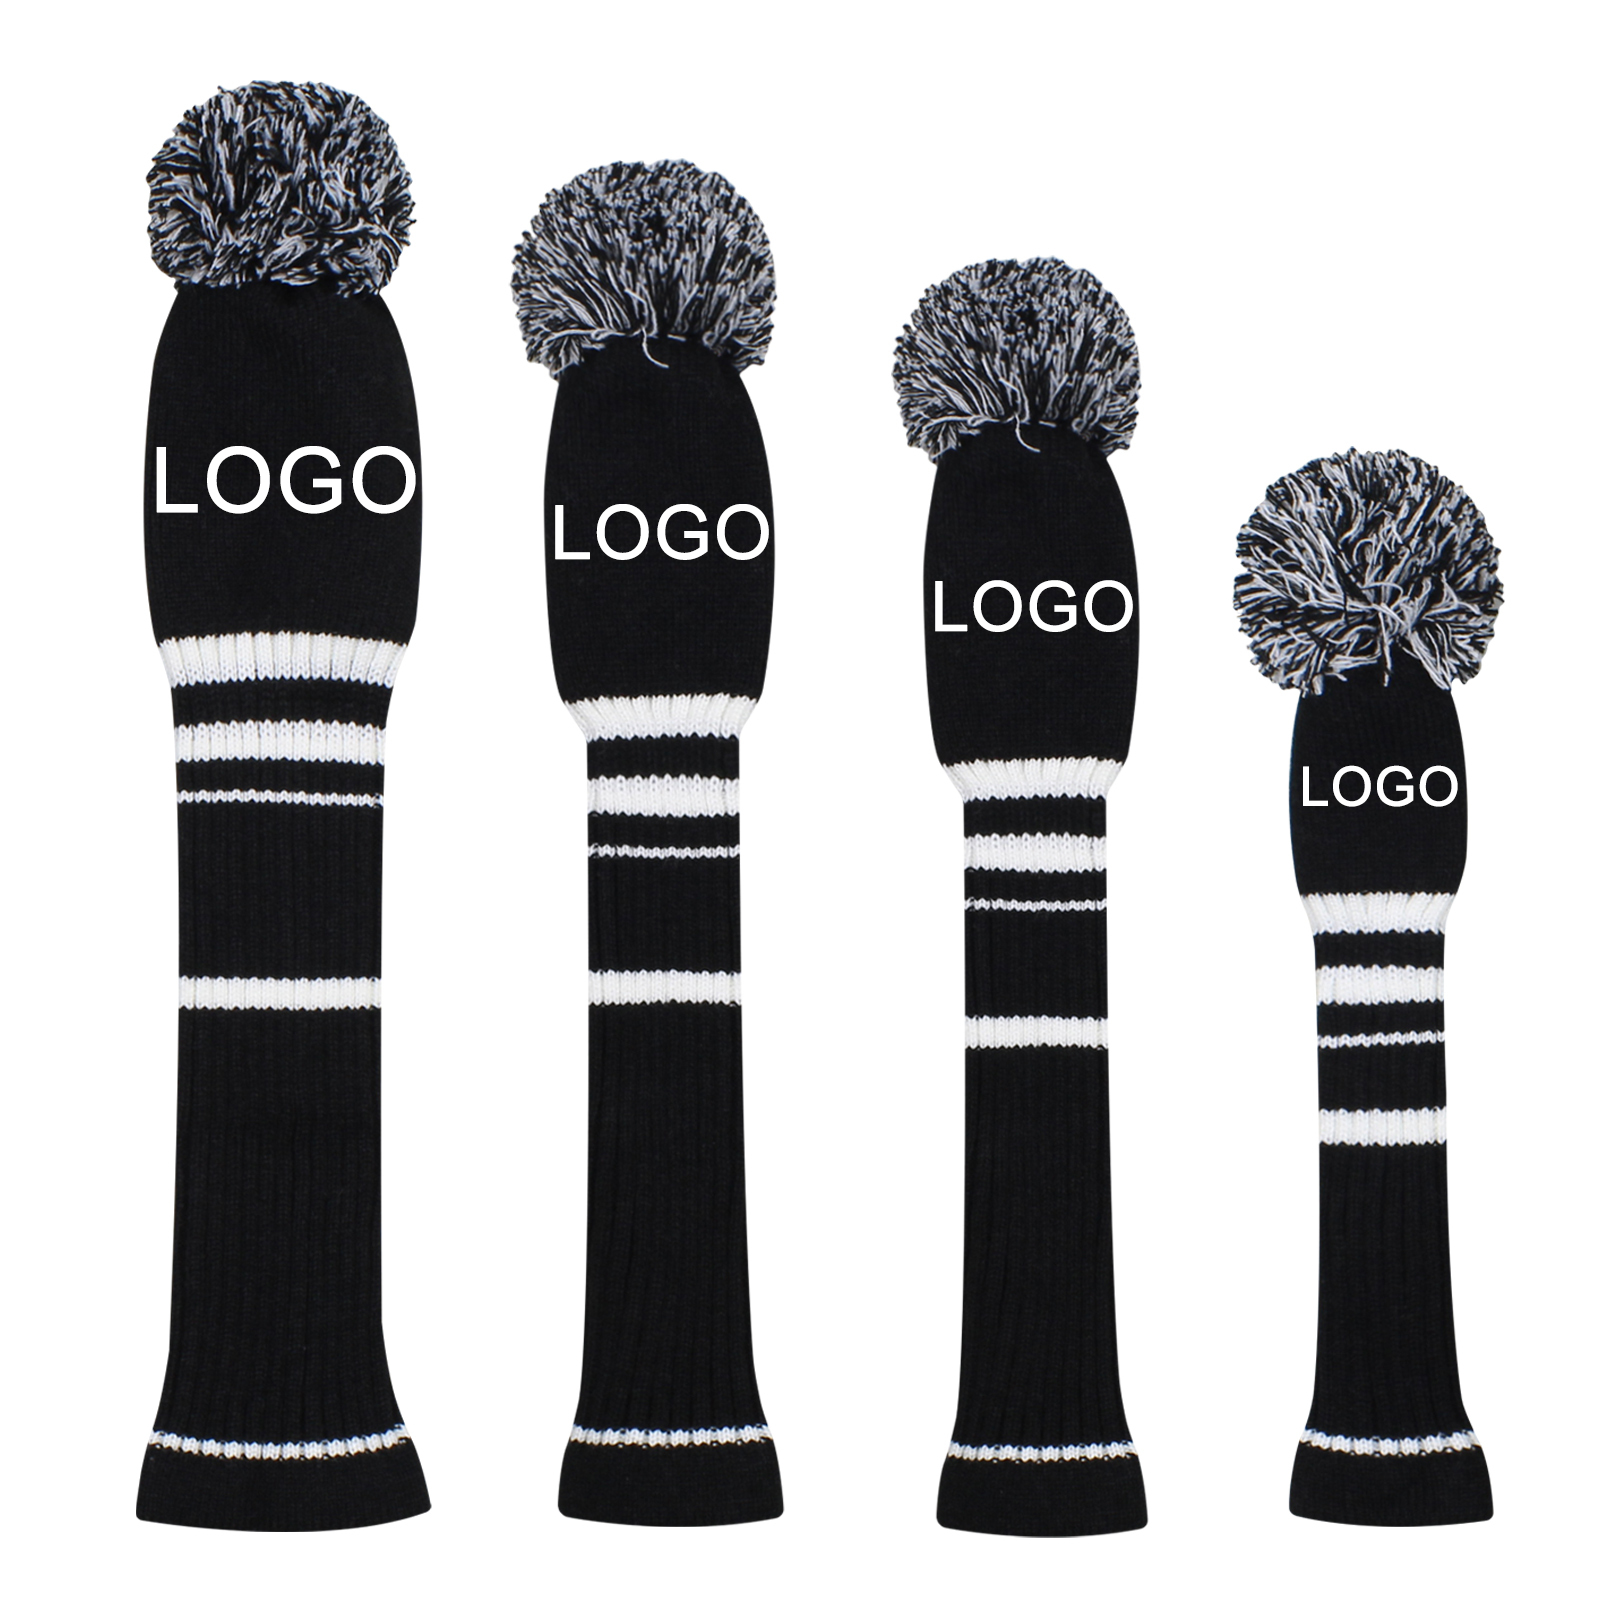 Scott Edward Custom Pom Pom Golf Head Covers Fit Max Drivers Fairways Hybrids/Utility with Rotating Number Tags (Black)